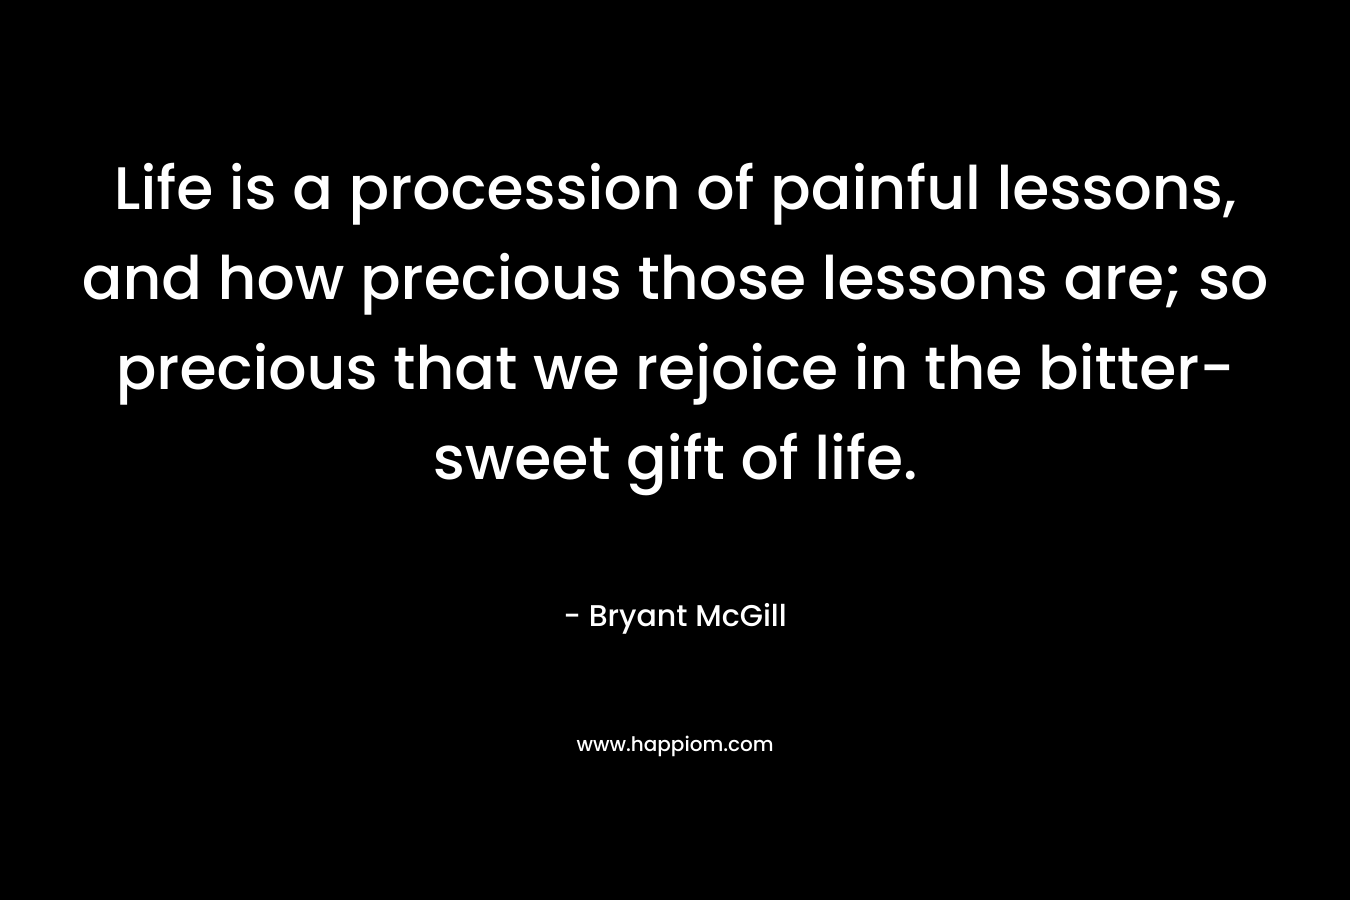 Life is a procession of painful lessons, and how precious those lessons are; so precious that we rejoice in the bitter-sweet gift of life. – Bryant McGill